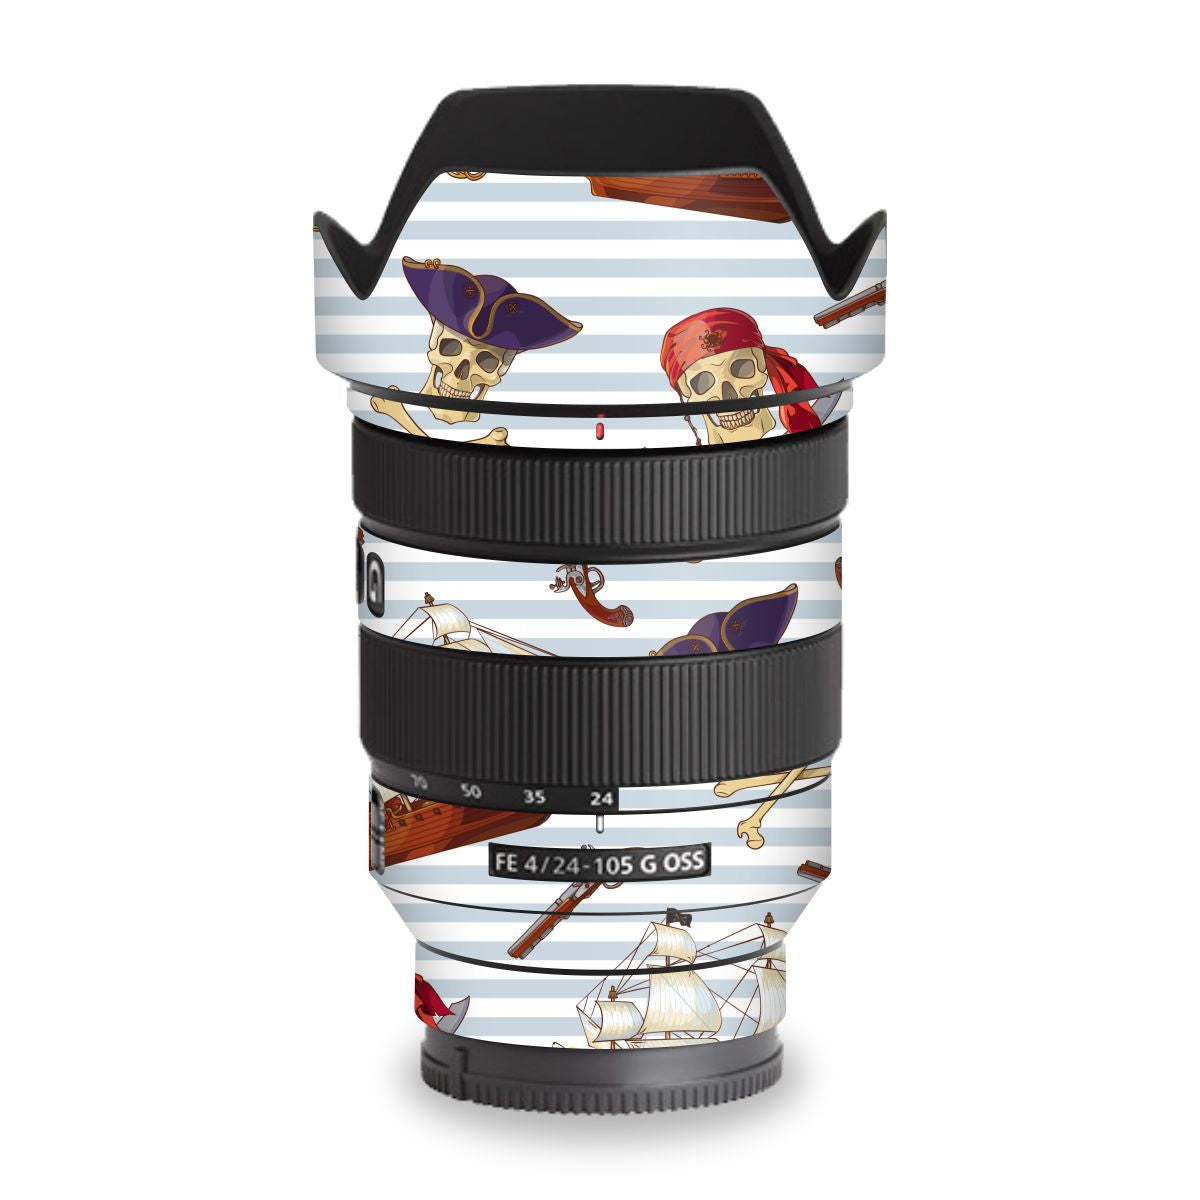 Photography Lens Skins & Wraps